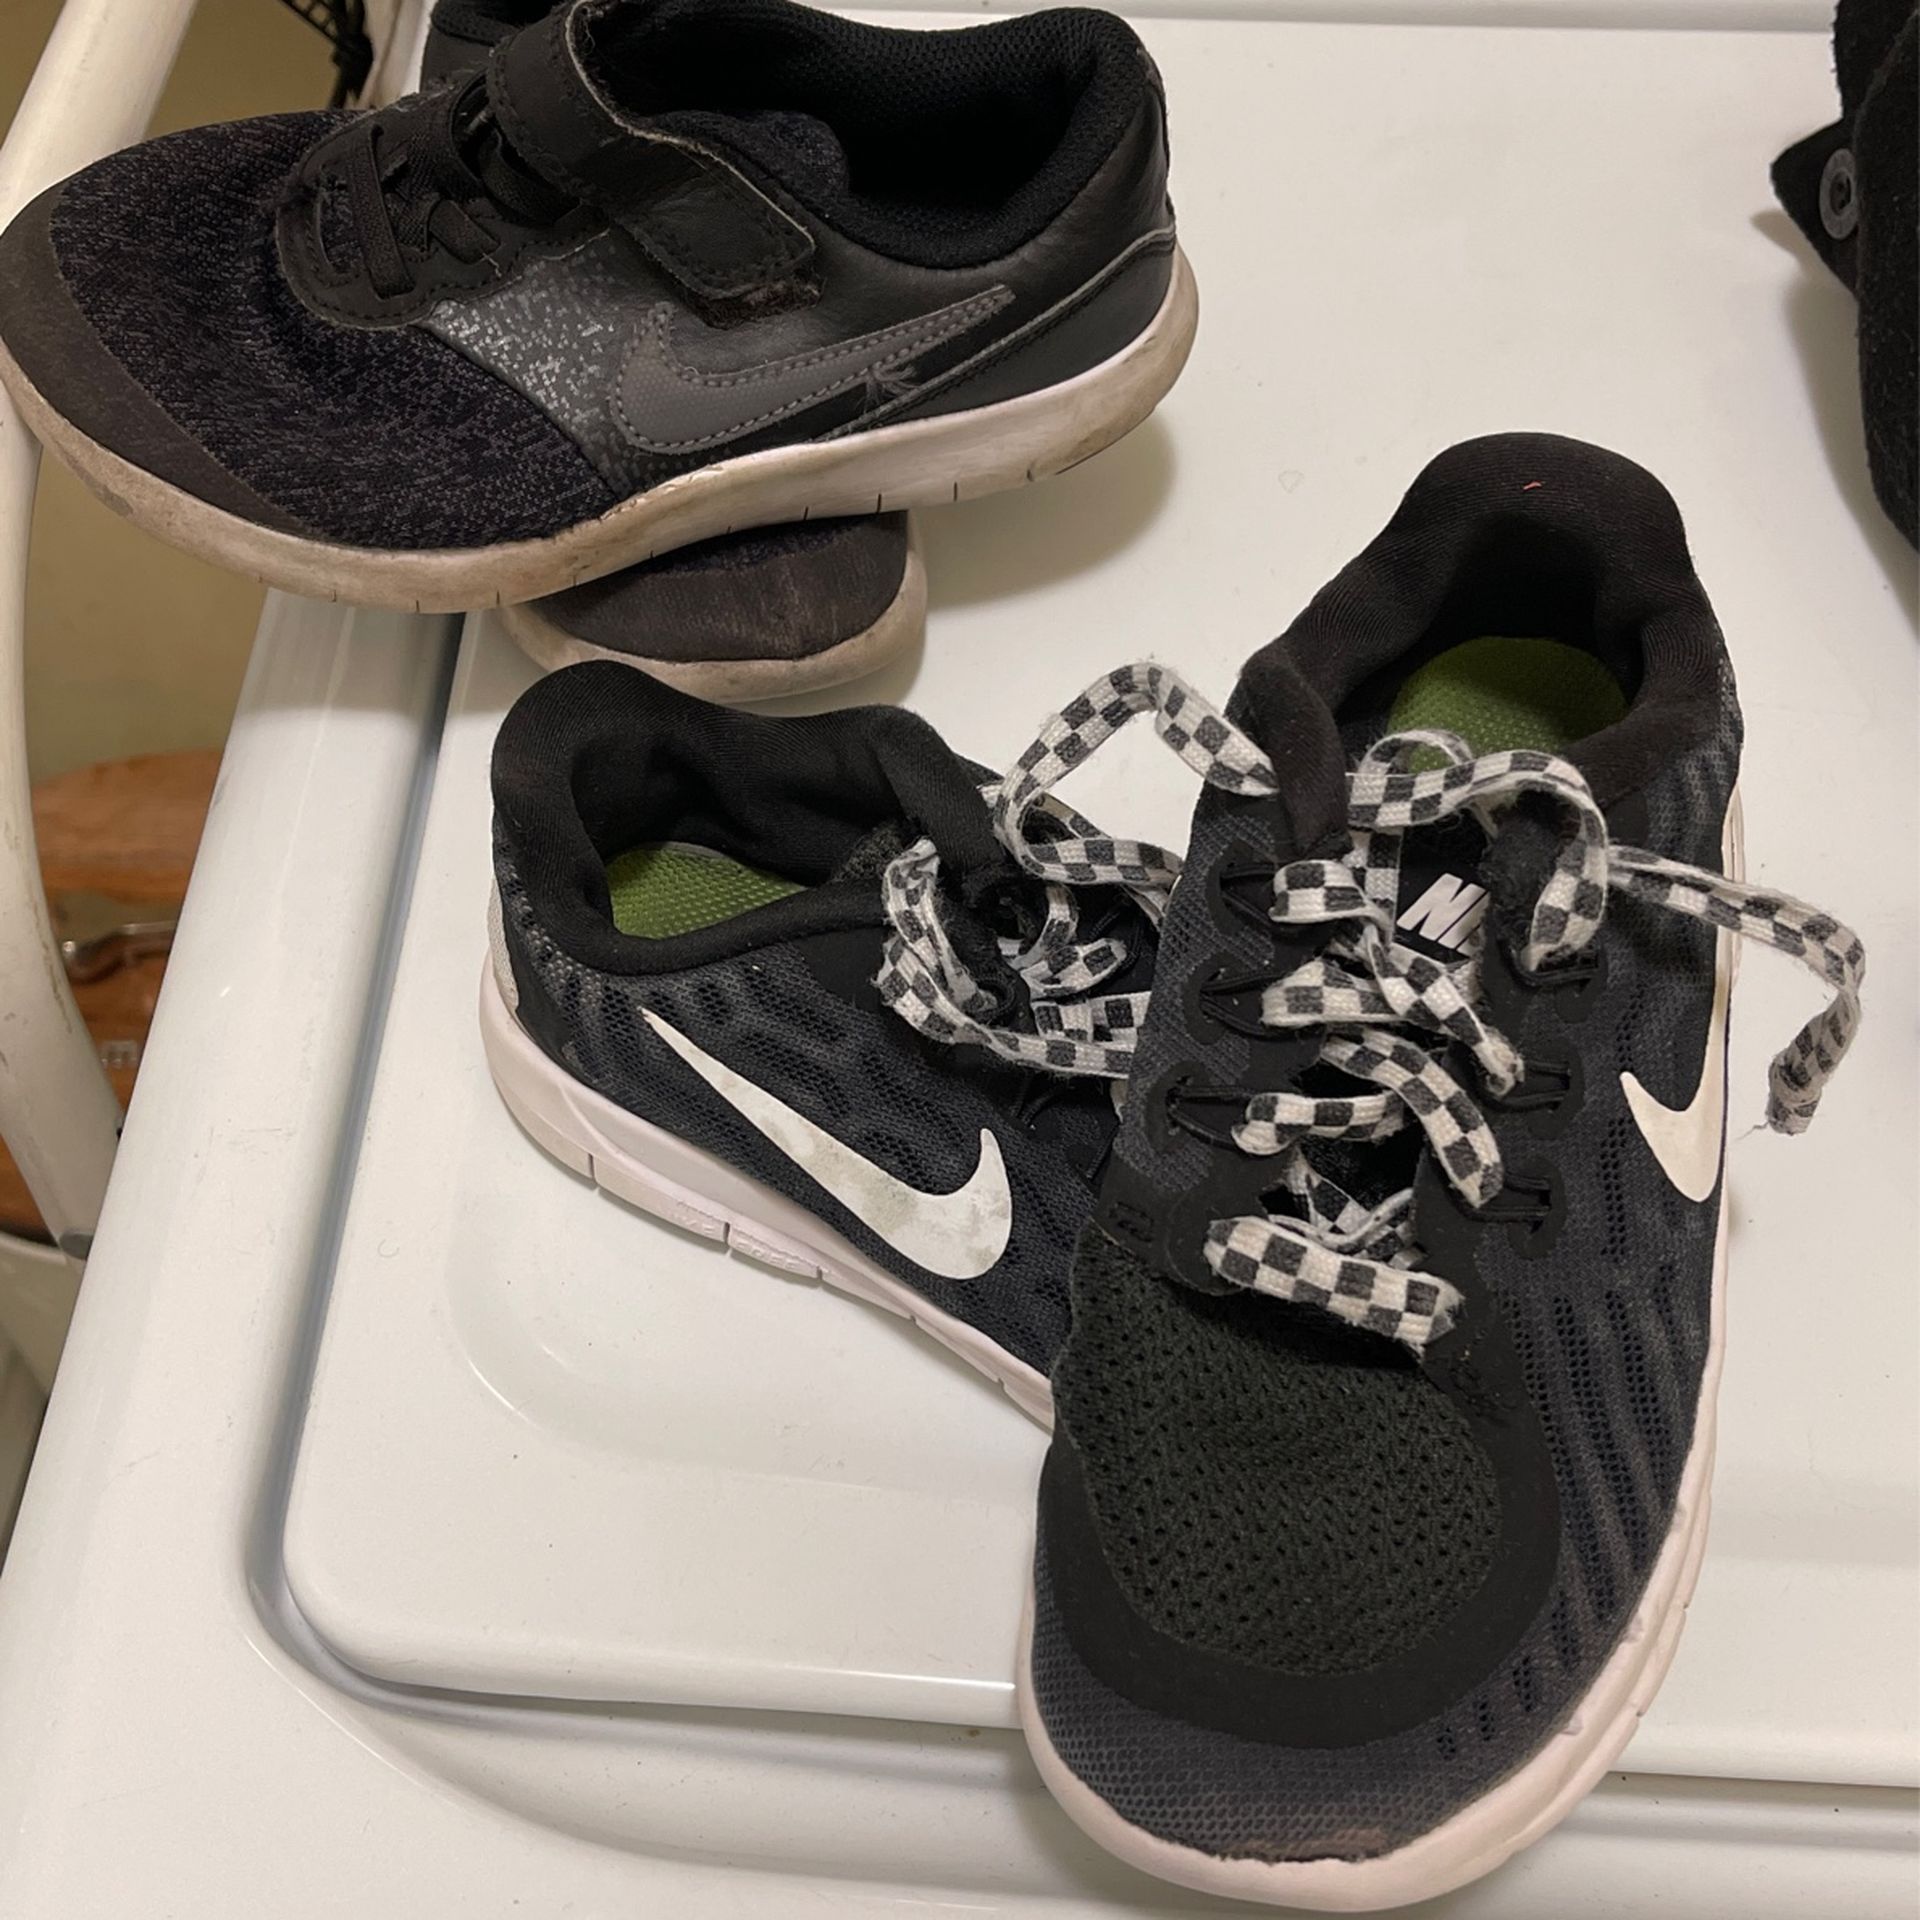 Girls Nike Shoes 2 Pairs For $10